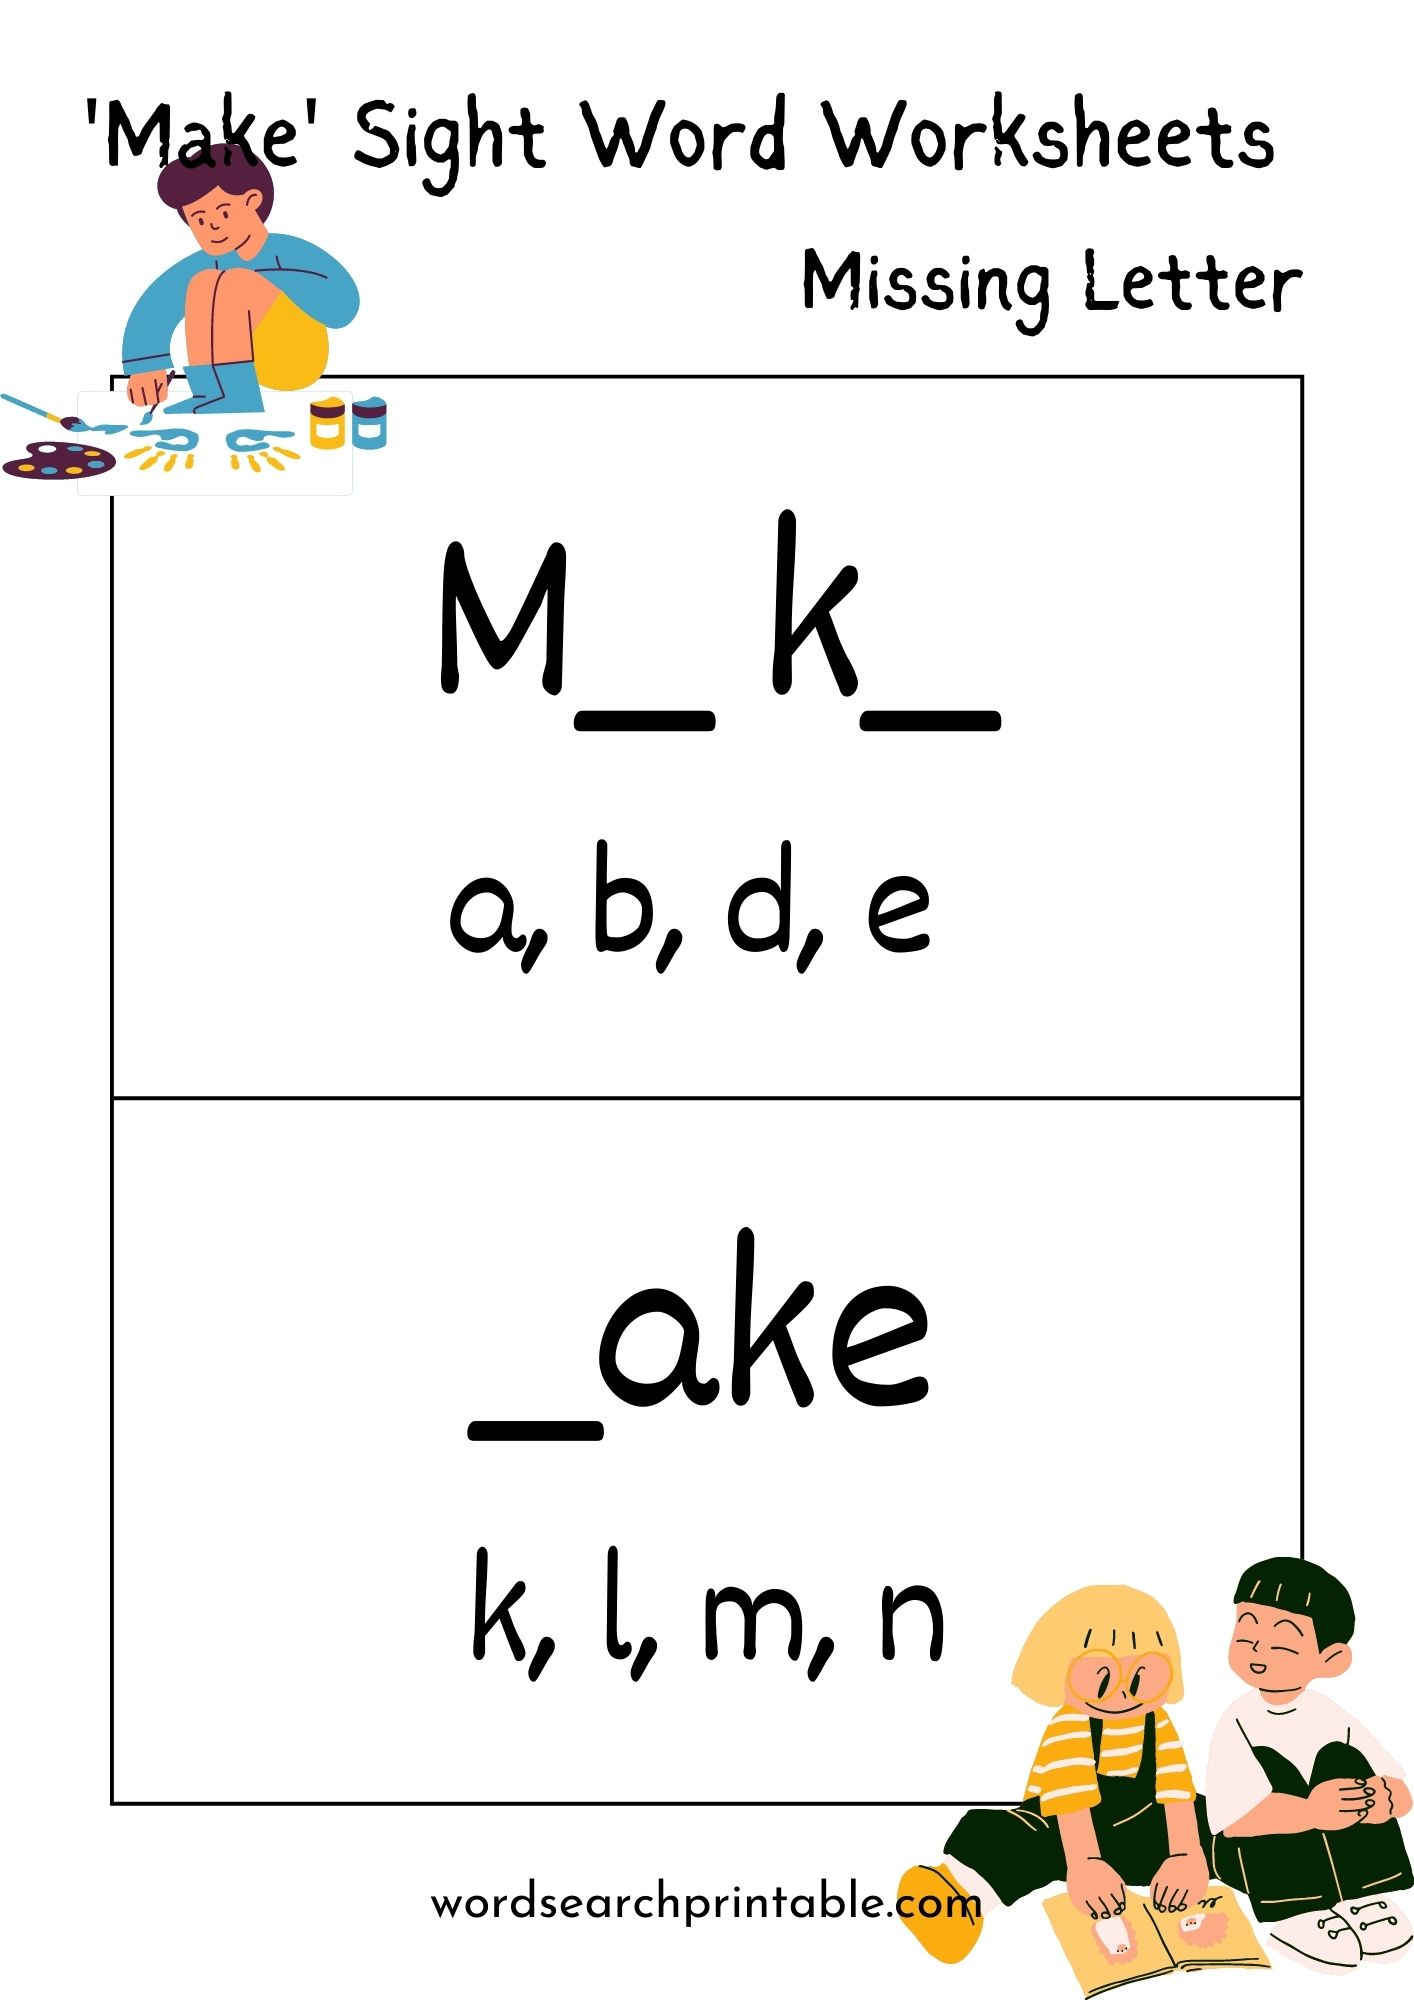 Find the missing letter in sight word make